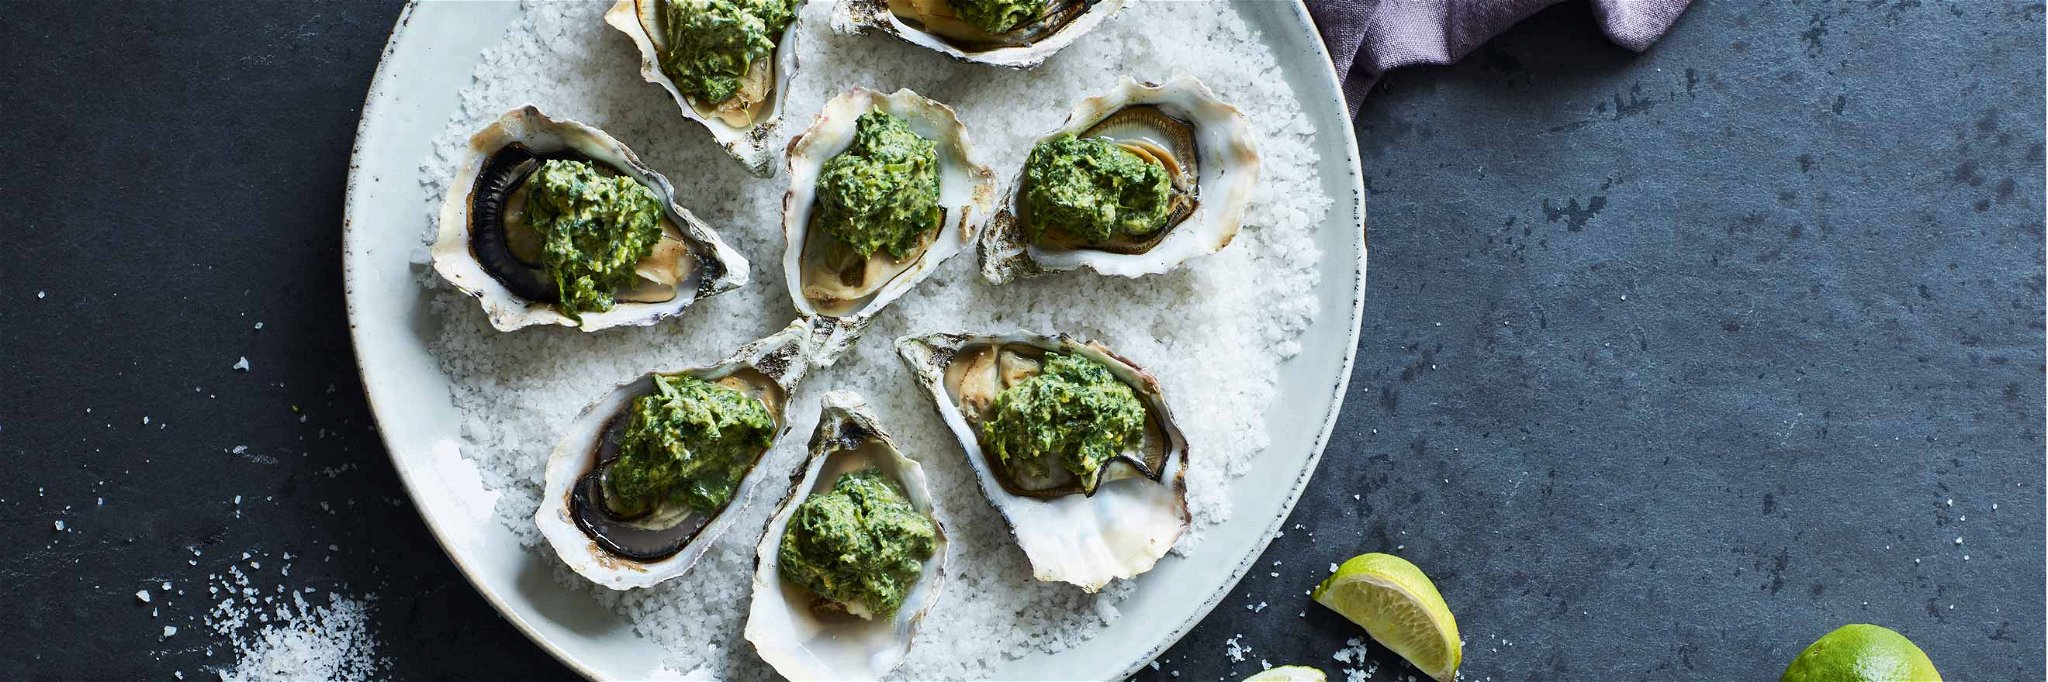 Baked Oysters with Lemongrass and Watercress